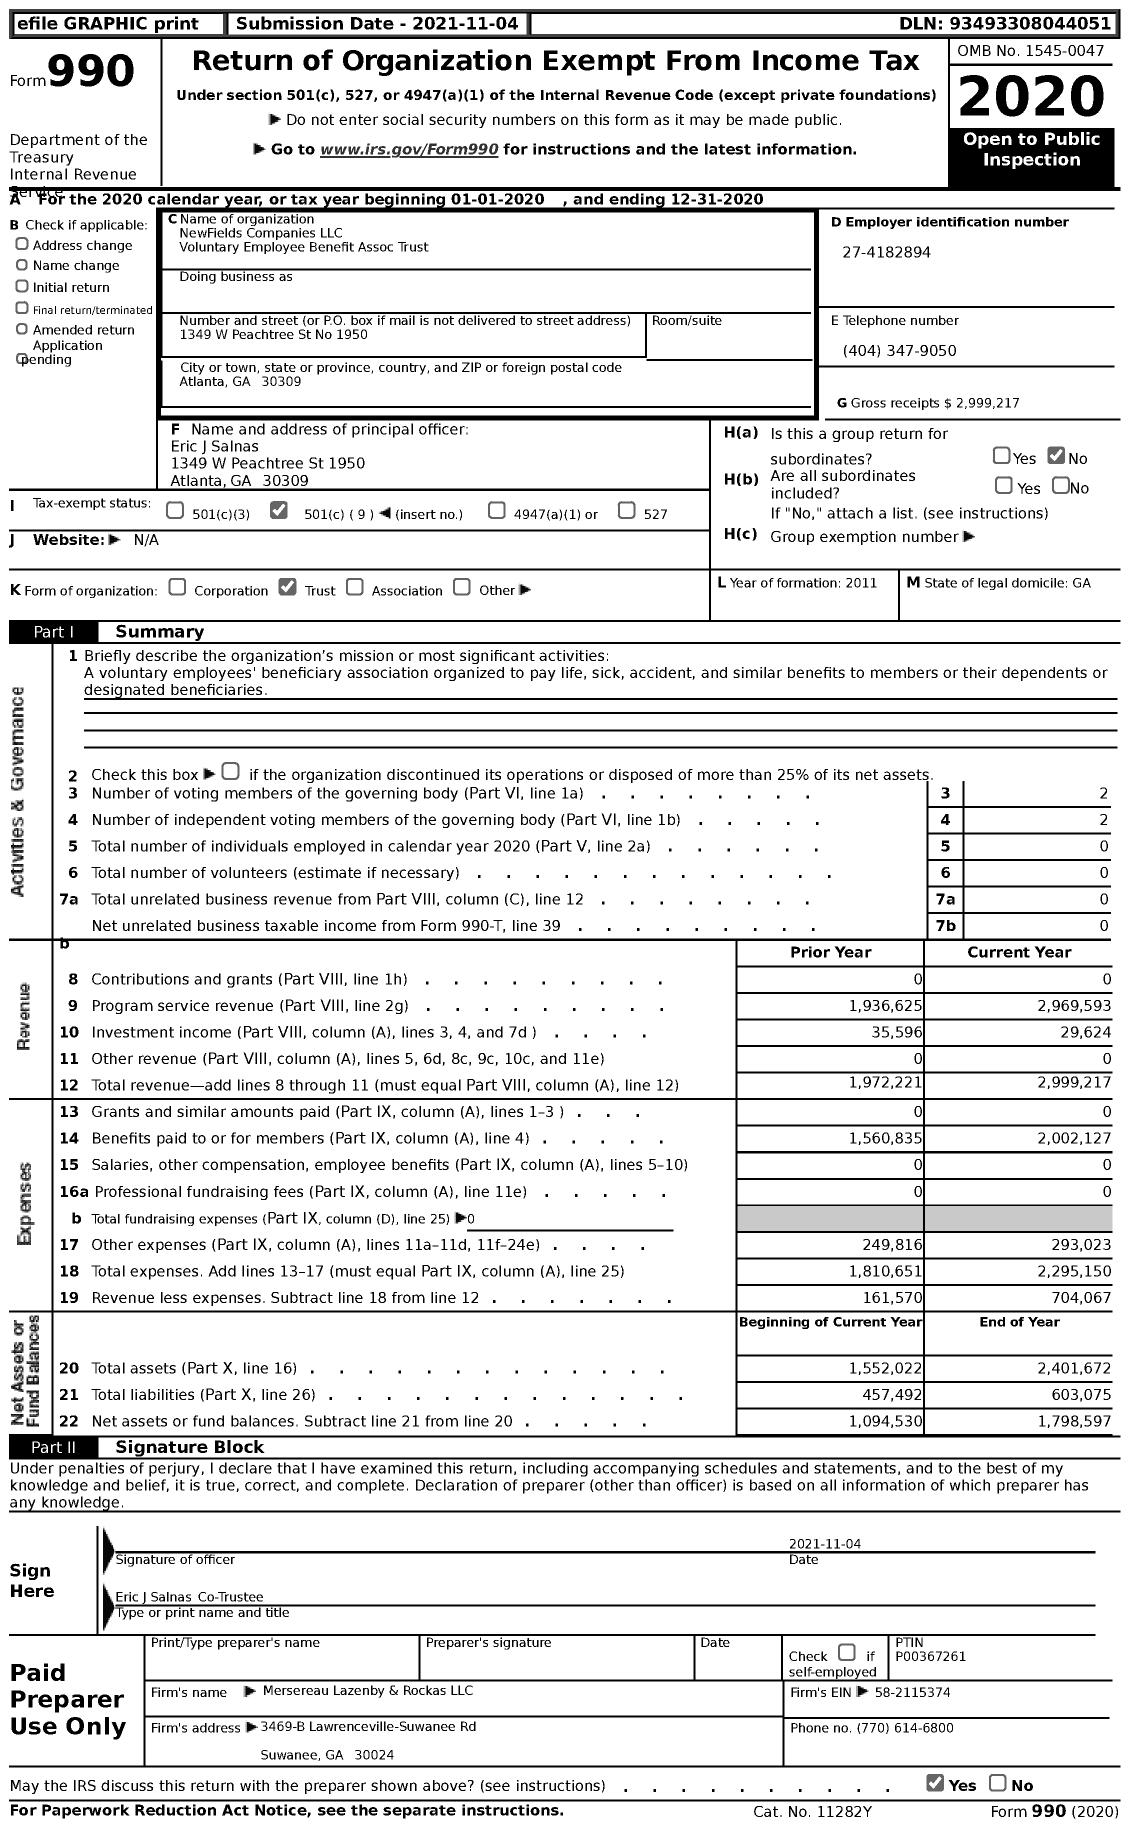 Image of first page of 2020 Form 990 for NewFields Companies LLC Voluntary Employee Benefit Assoc Trust